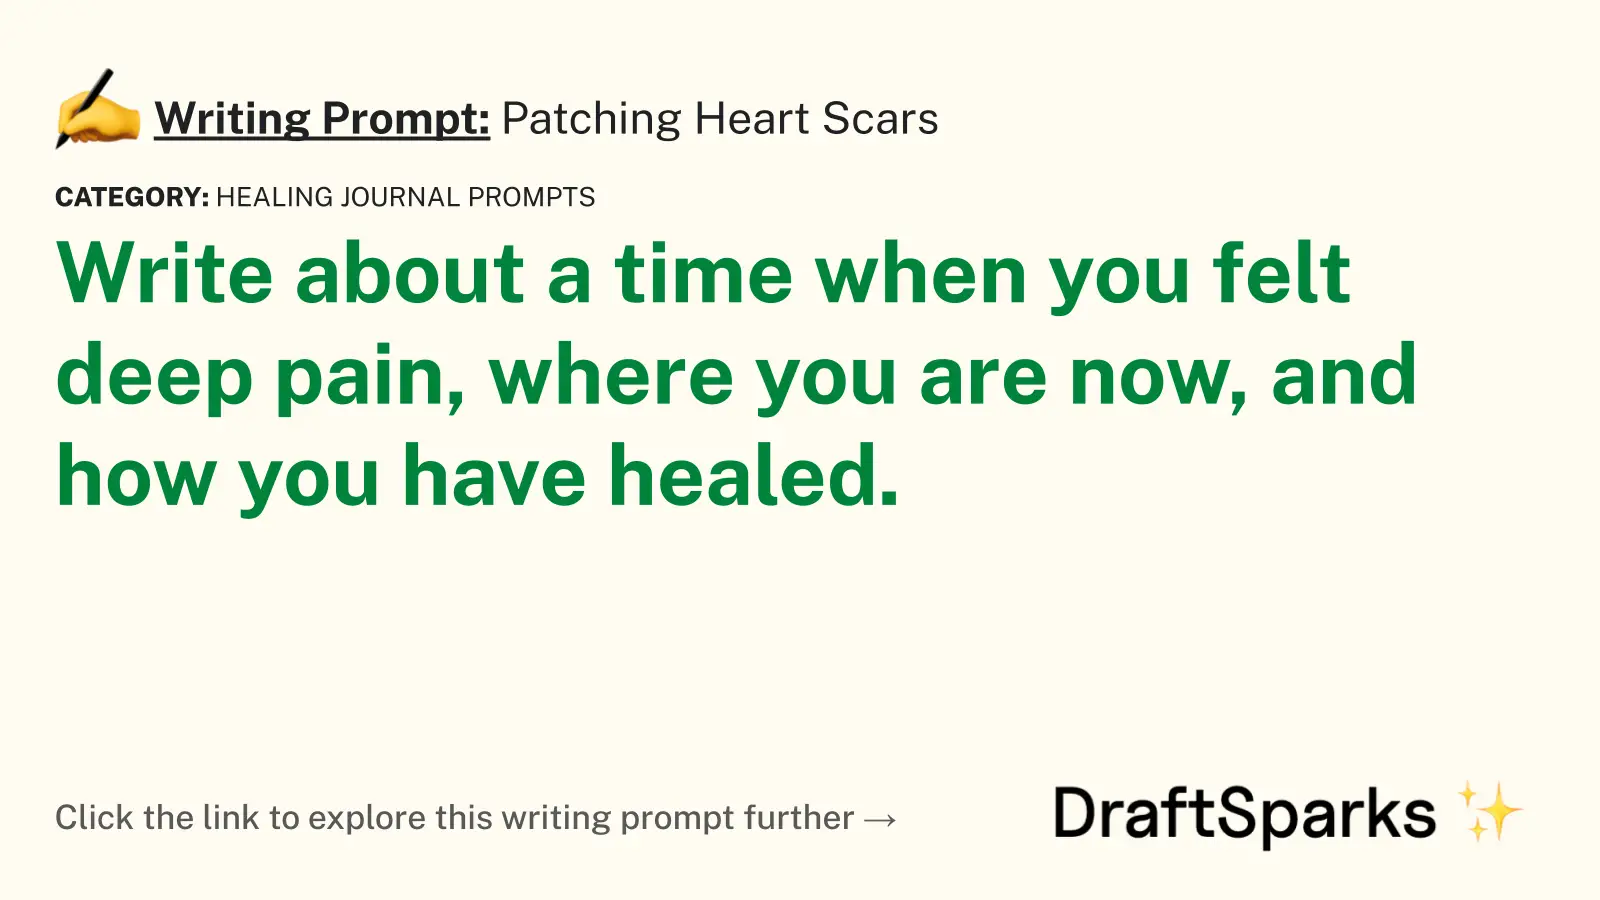 Patching Heart Scars